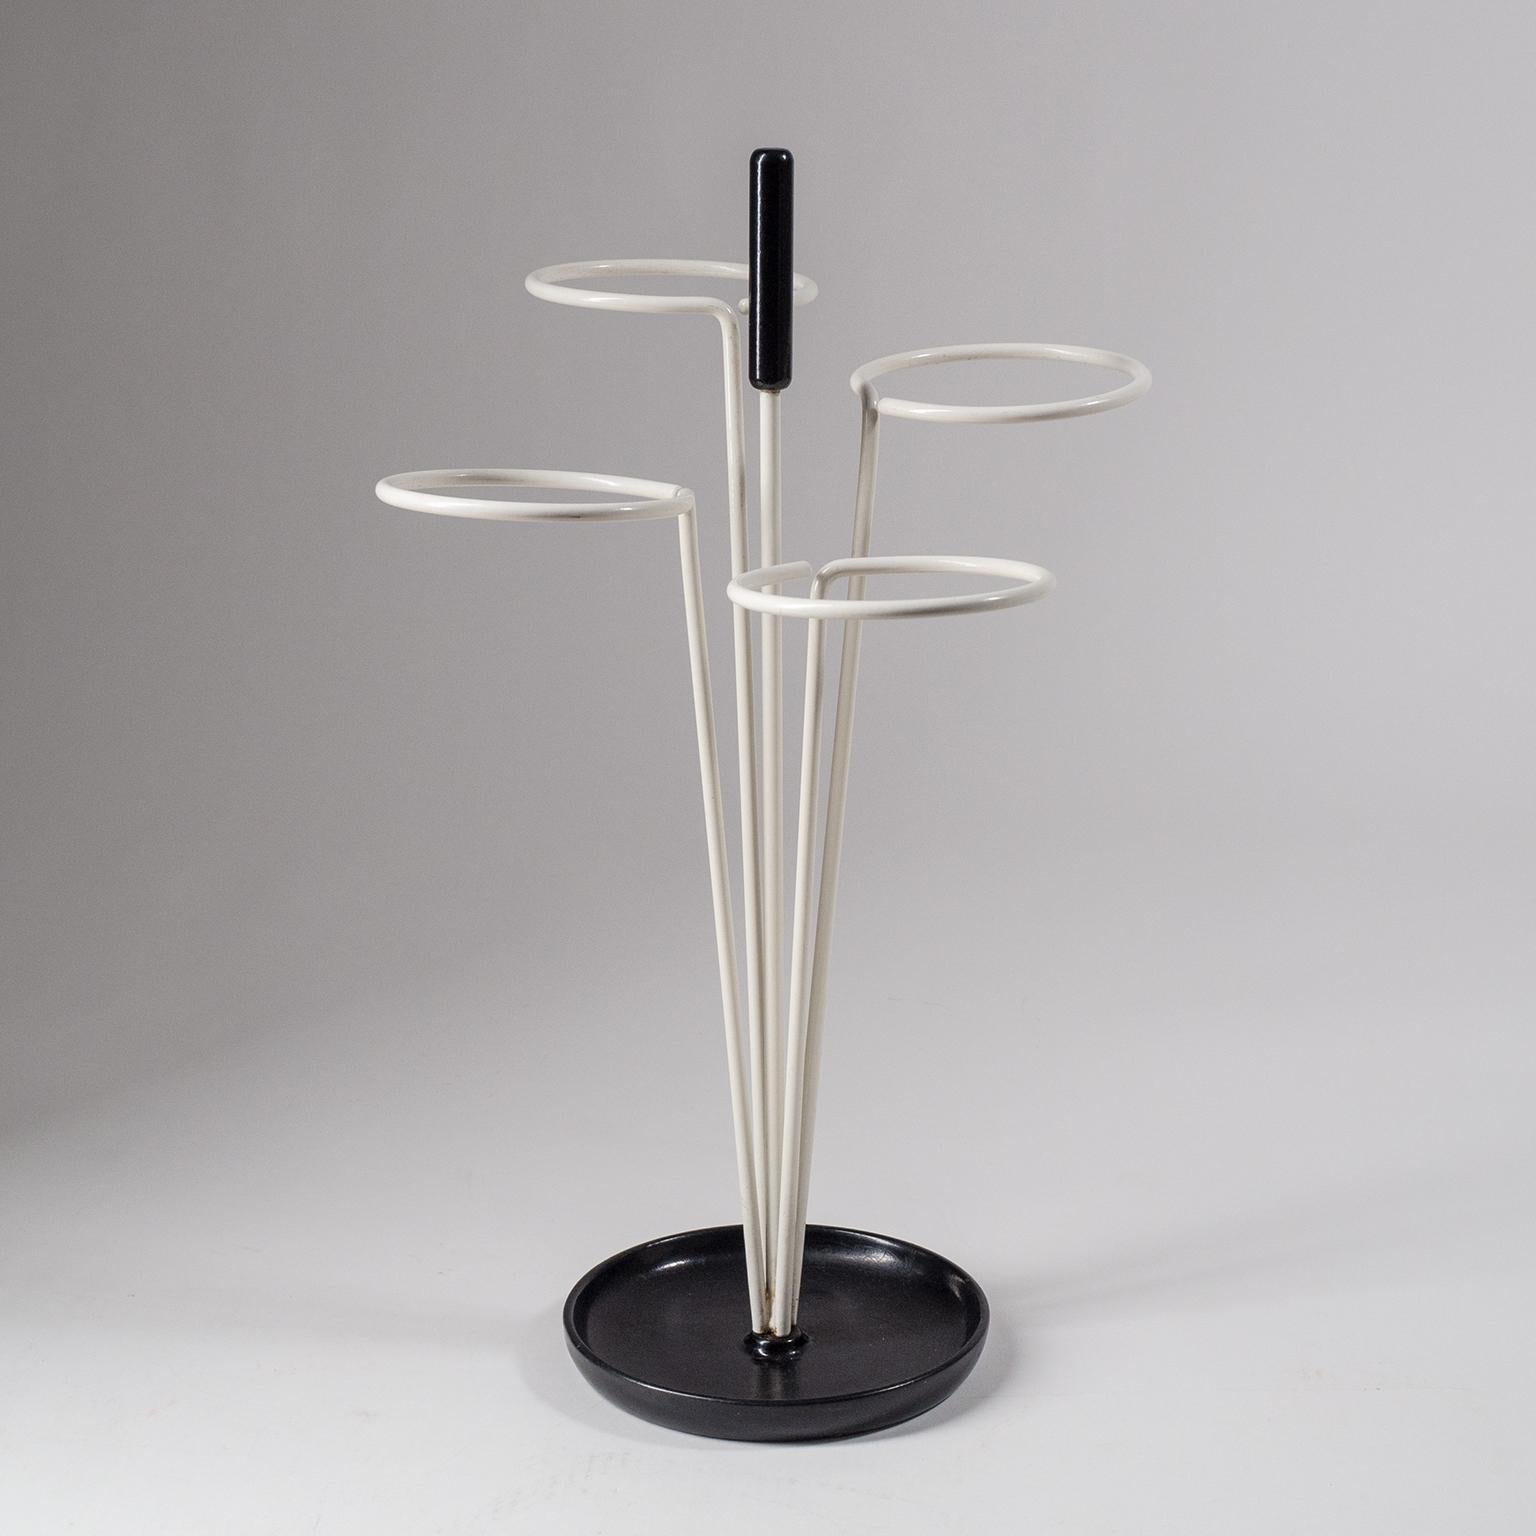 Fine graphical umbrella stand from the 1960s. Minimalist black and white enameled steel structure with a weighted base. Very good original condition with just minor wear.